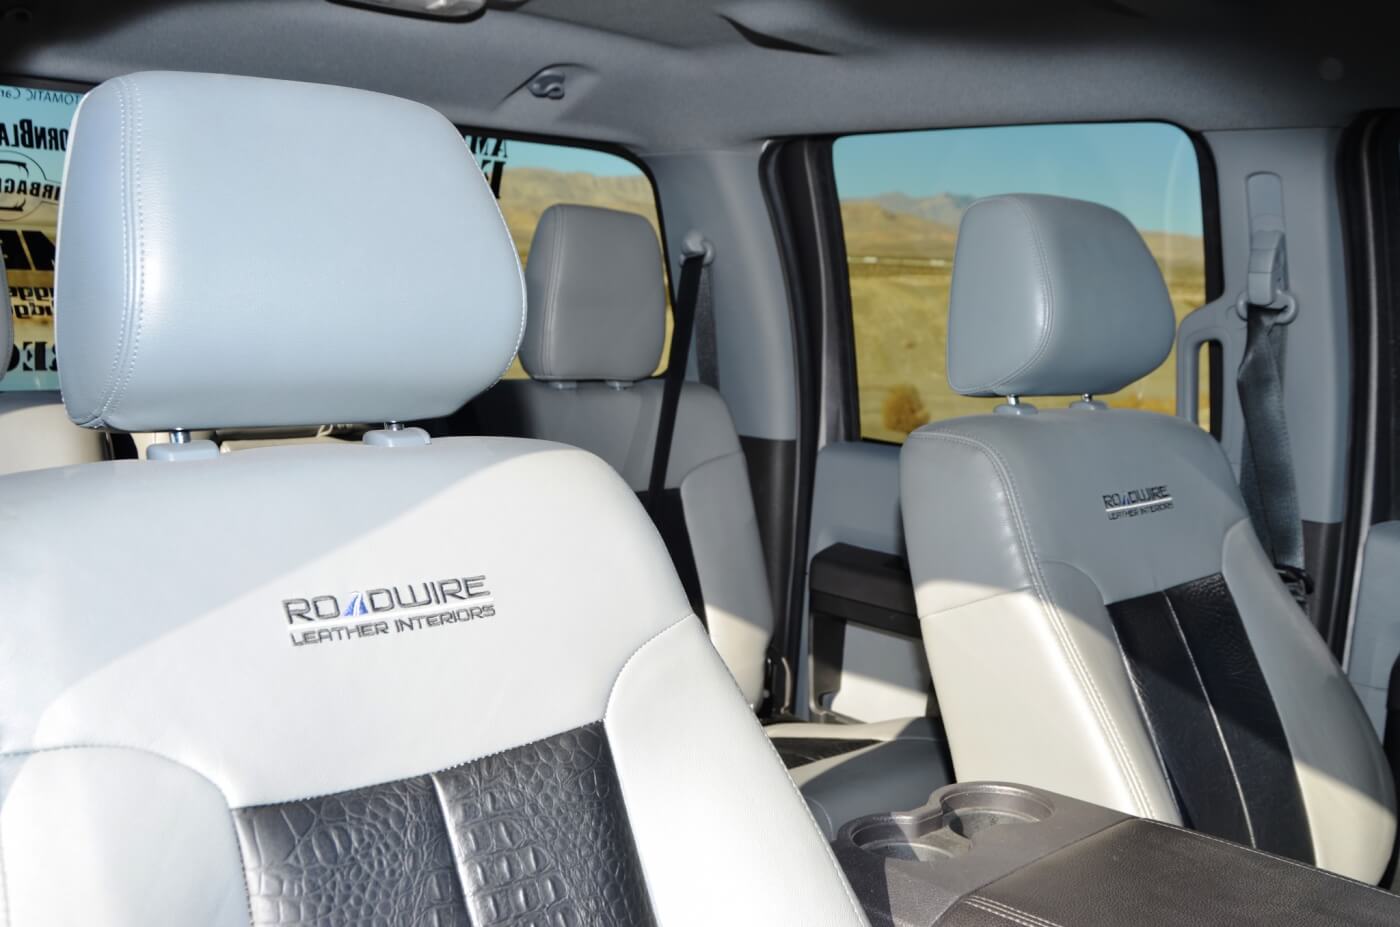 The interior features a mass of stereo upgrades from Pioneer and PowerBass as well as multiple monitors for passenger TV viewing. The seats were wrapped in custom two-tone leather for the utmost in road trip comfort.